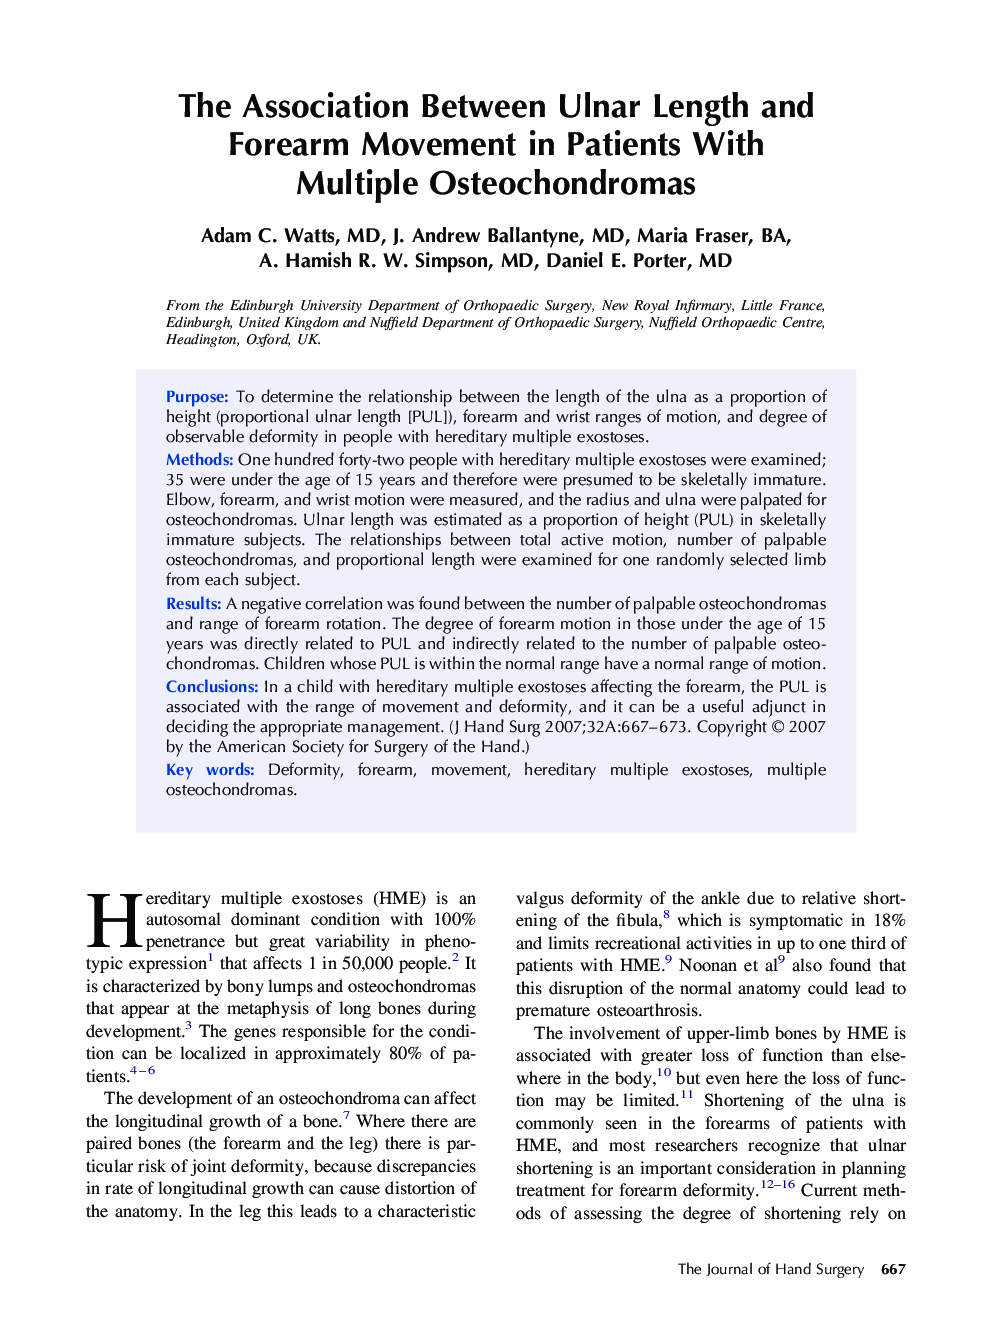 The Association Between Ulnar Length and Forearm Movement in Patients With Multiple Osteochondromas 